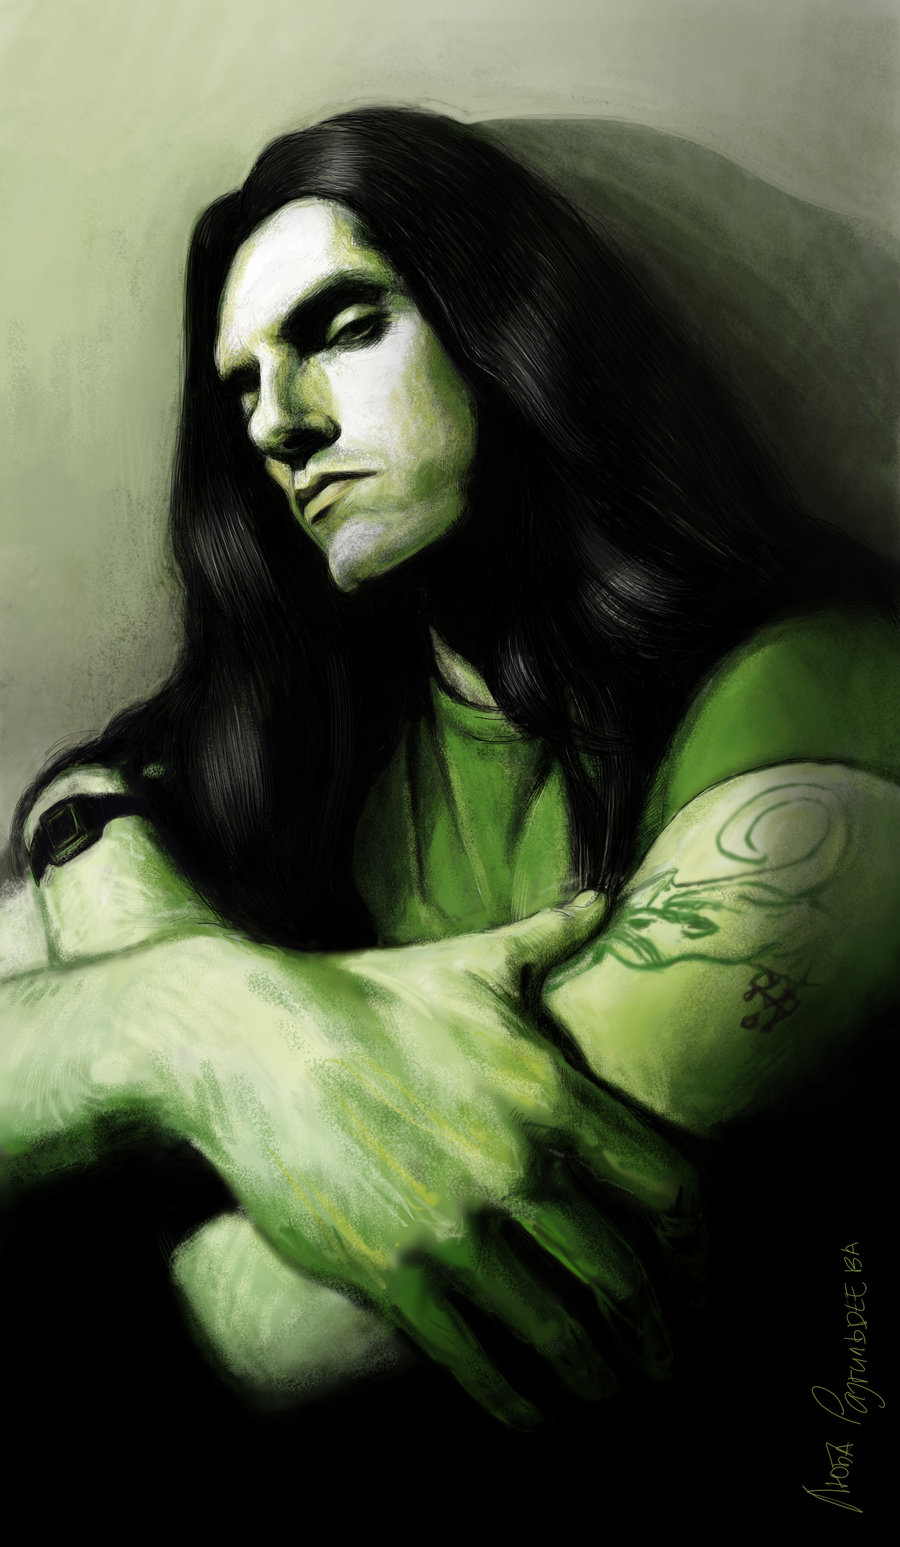 Peter Steele TypeONegative by Moolver sin on